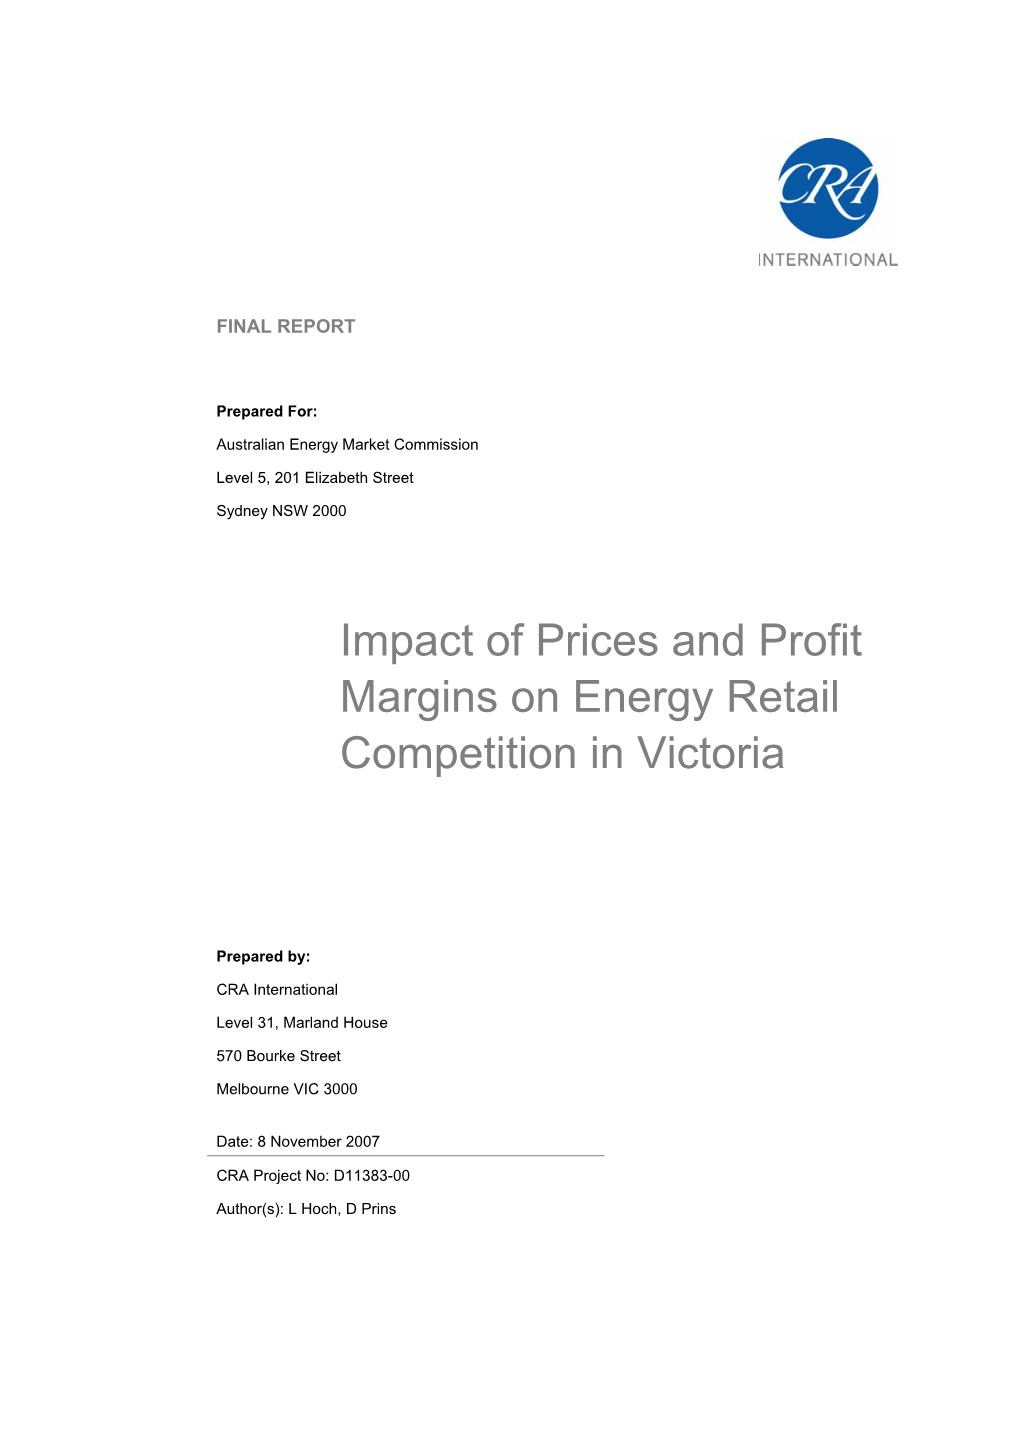 Impact of Prices and Profit Margins on Energy Retail Competition in Victoria